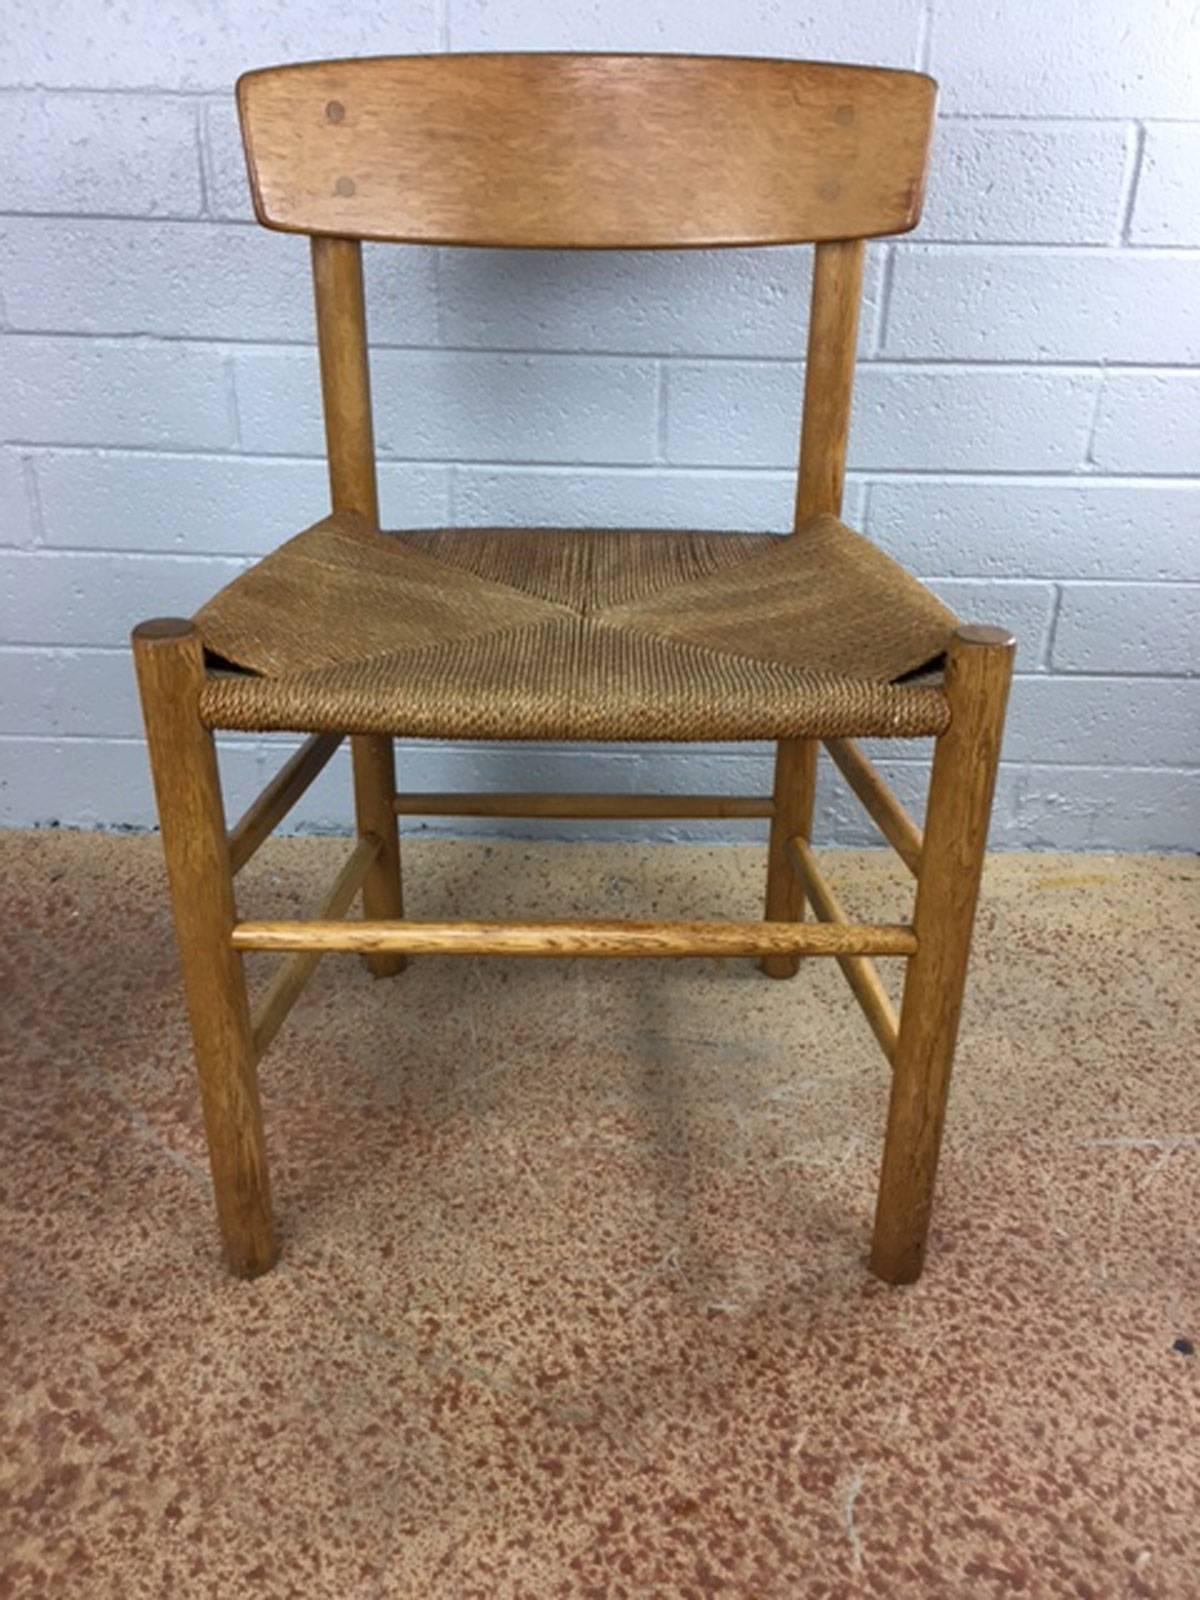 Borge Mogensen set of four oak framed model J39 dining chairs. Paper cord seat webbing is in very good condition. All intact. Price is for all four chairs.